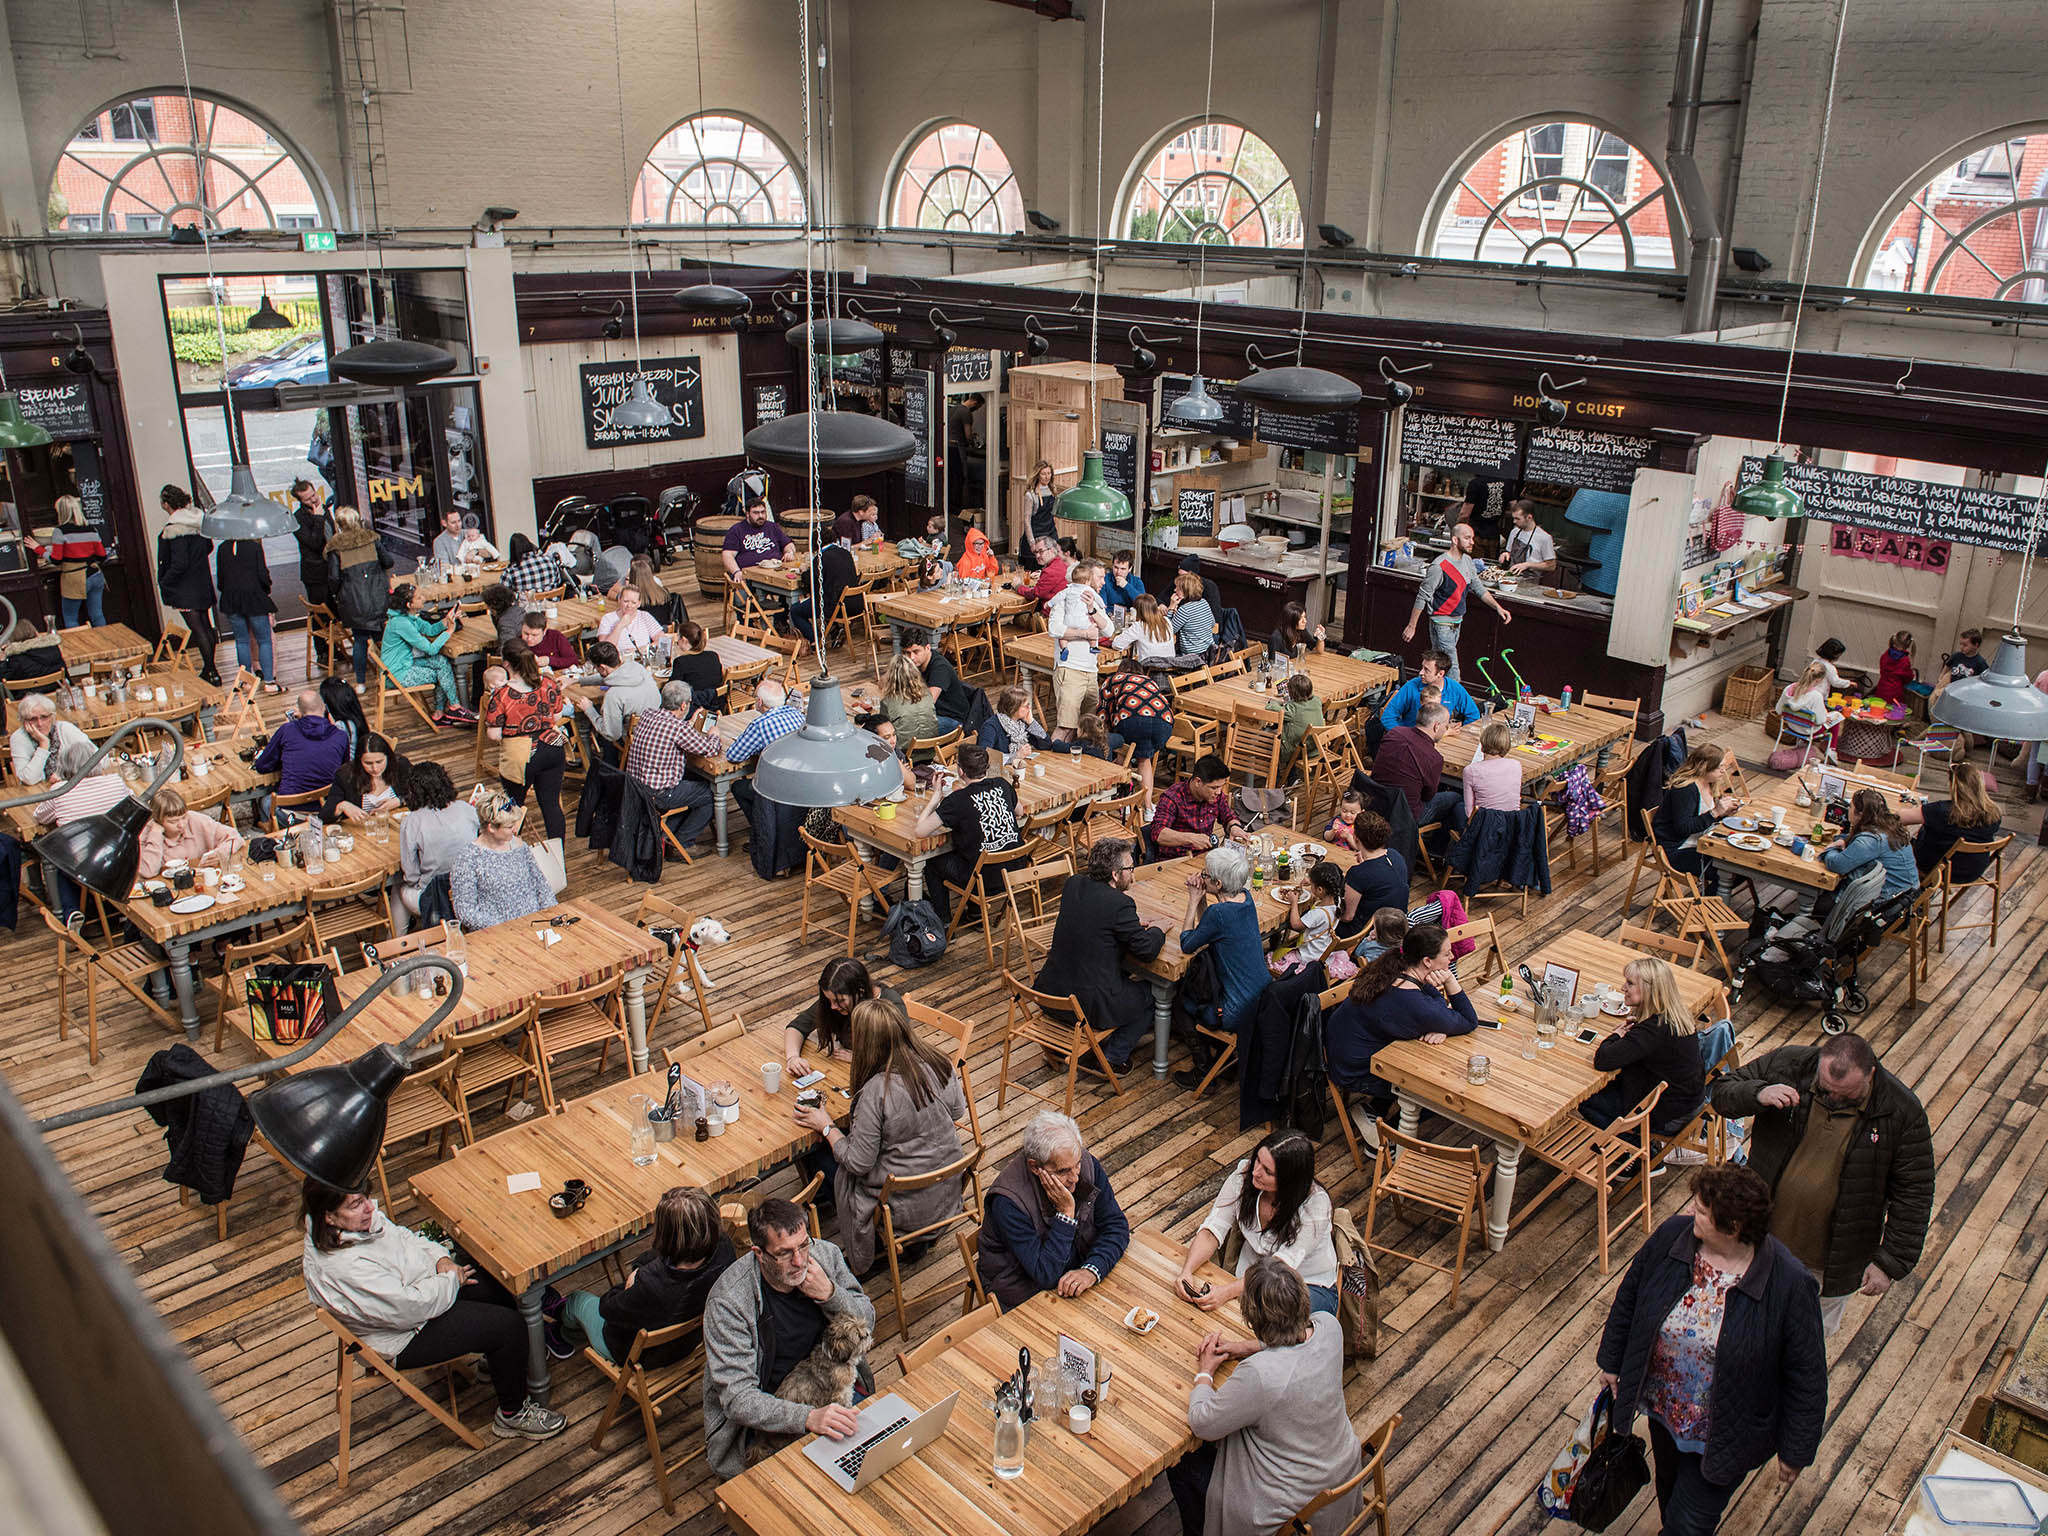 Mackie Mayor food market has eight kitchens, a brewery and a bottle shop all inside a grade II-listed building